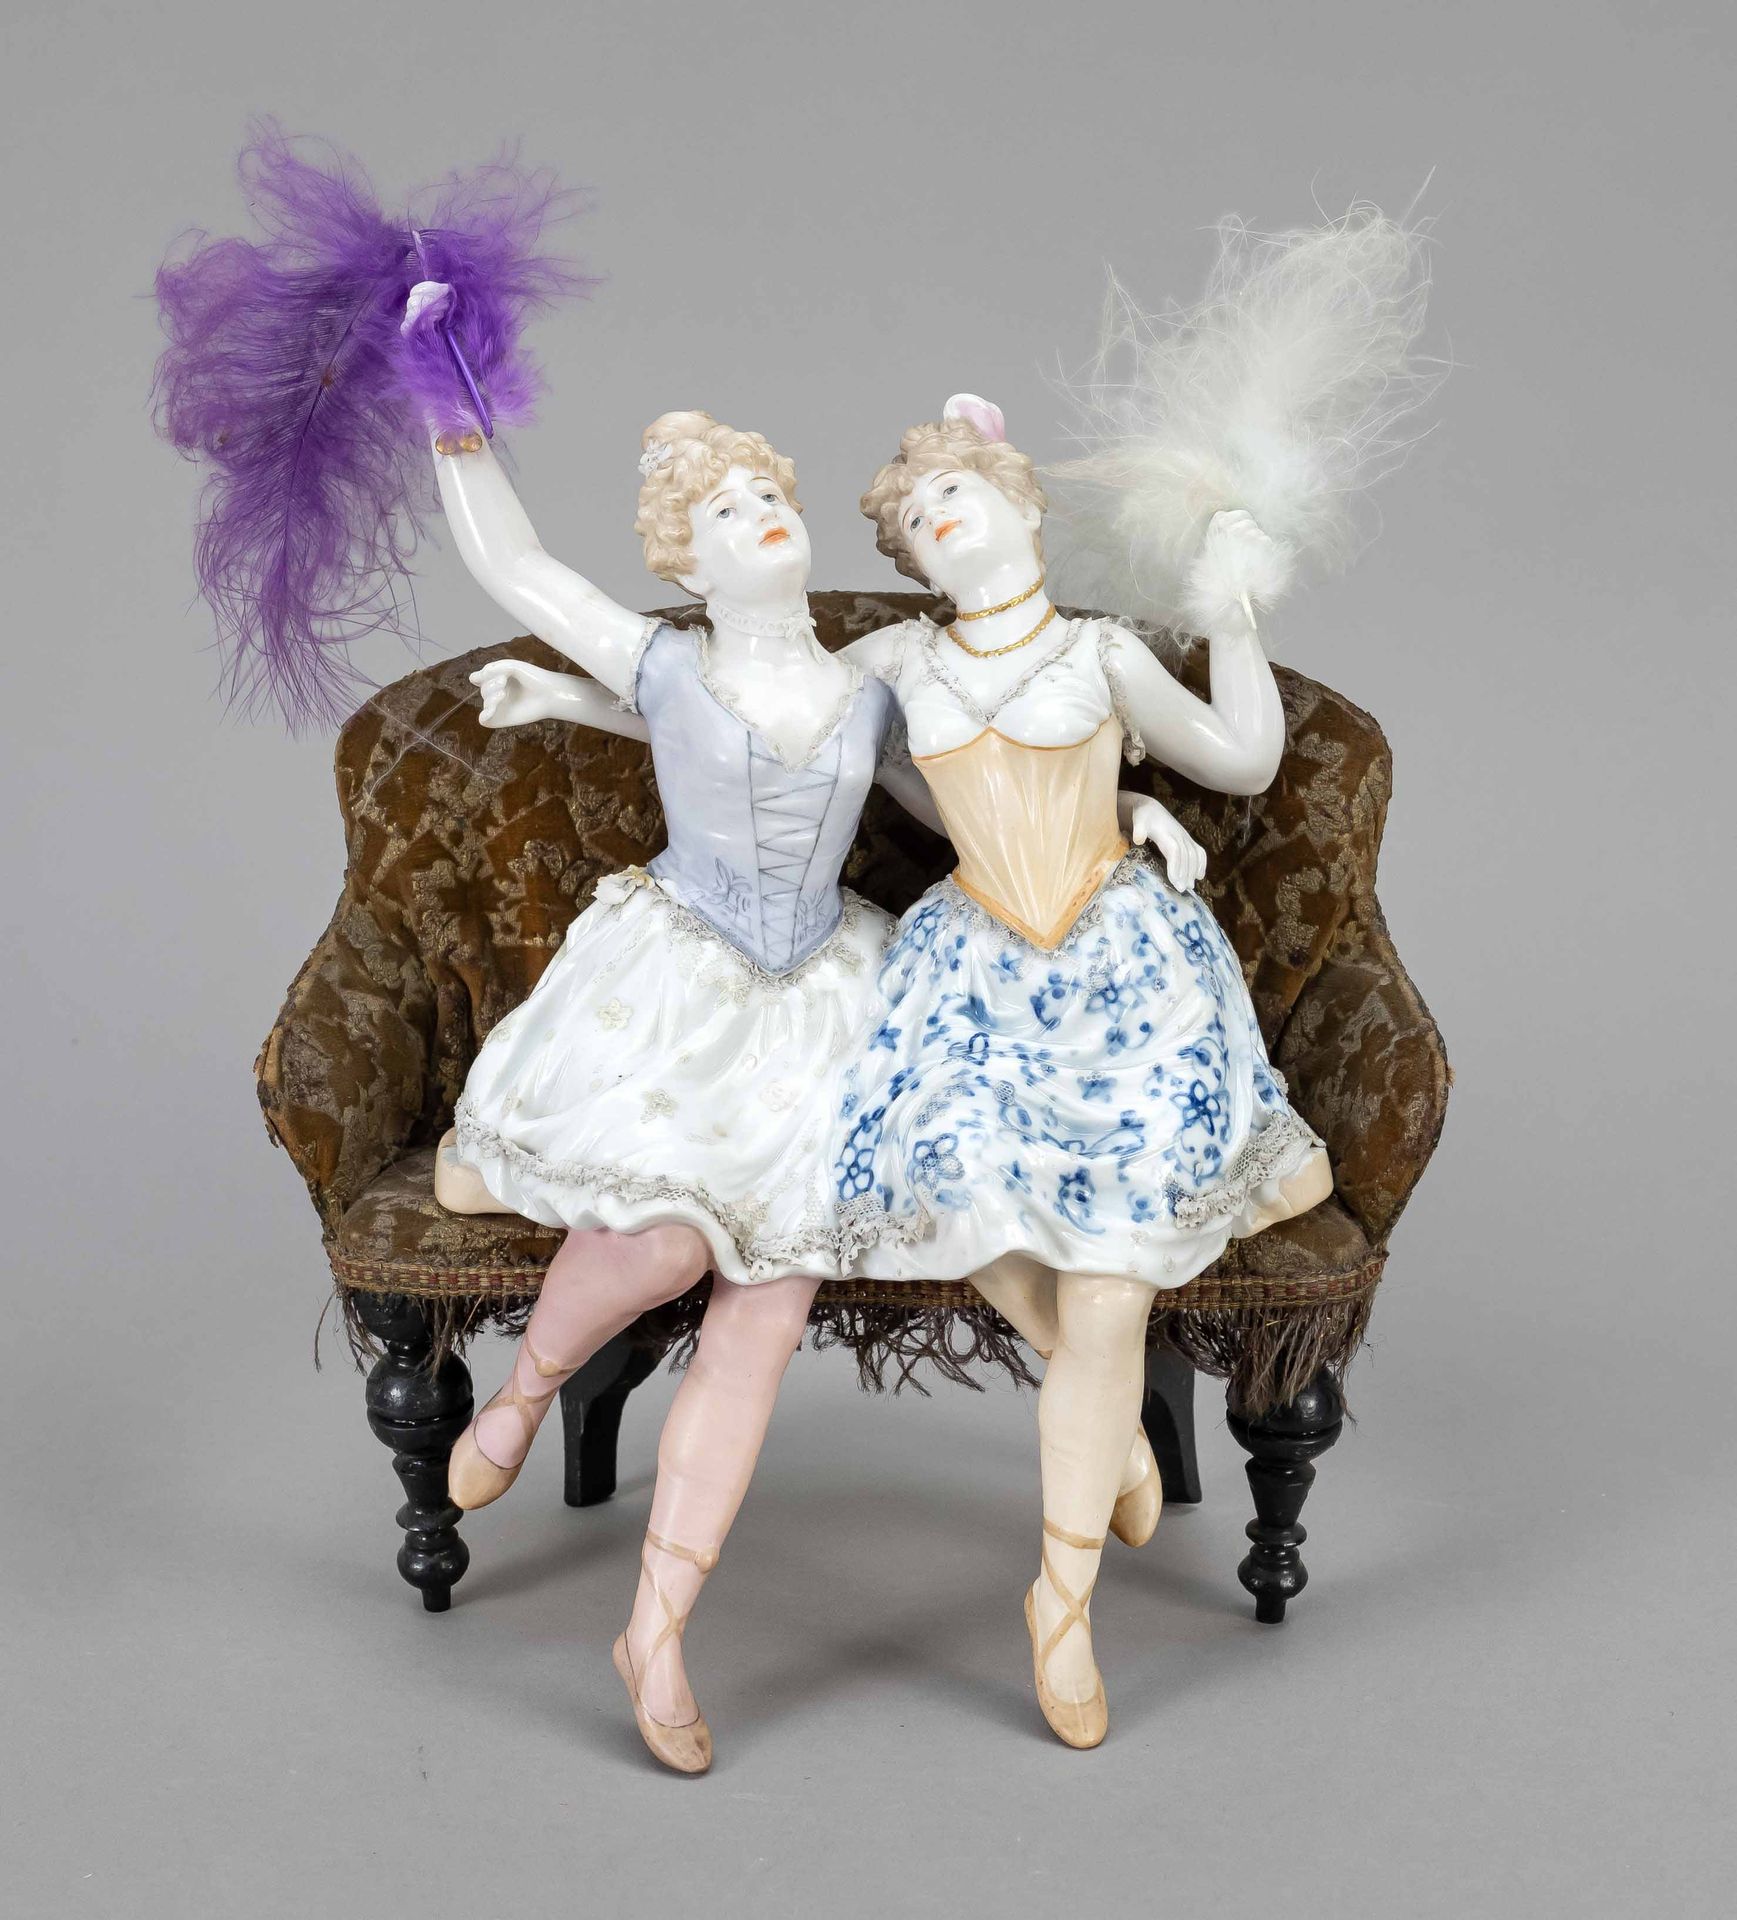 Null Two dancers on a sofa, c. 1900, porcelain figures with feathers in their ha&hellip;